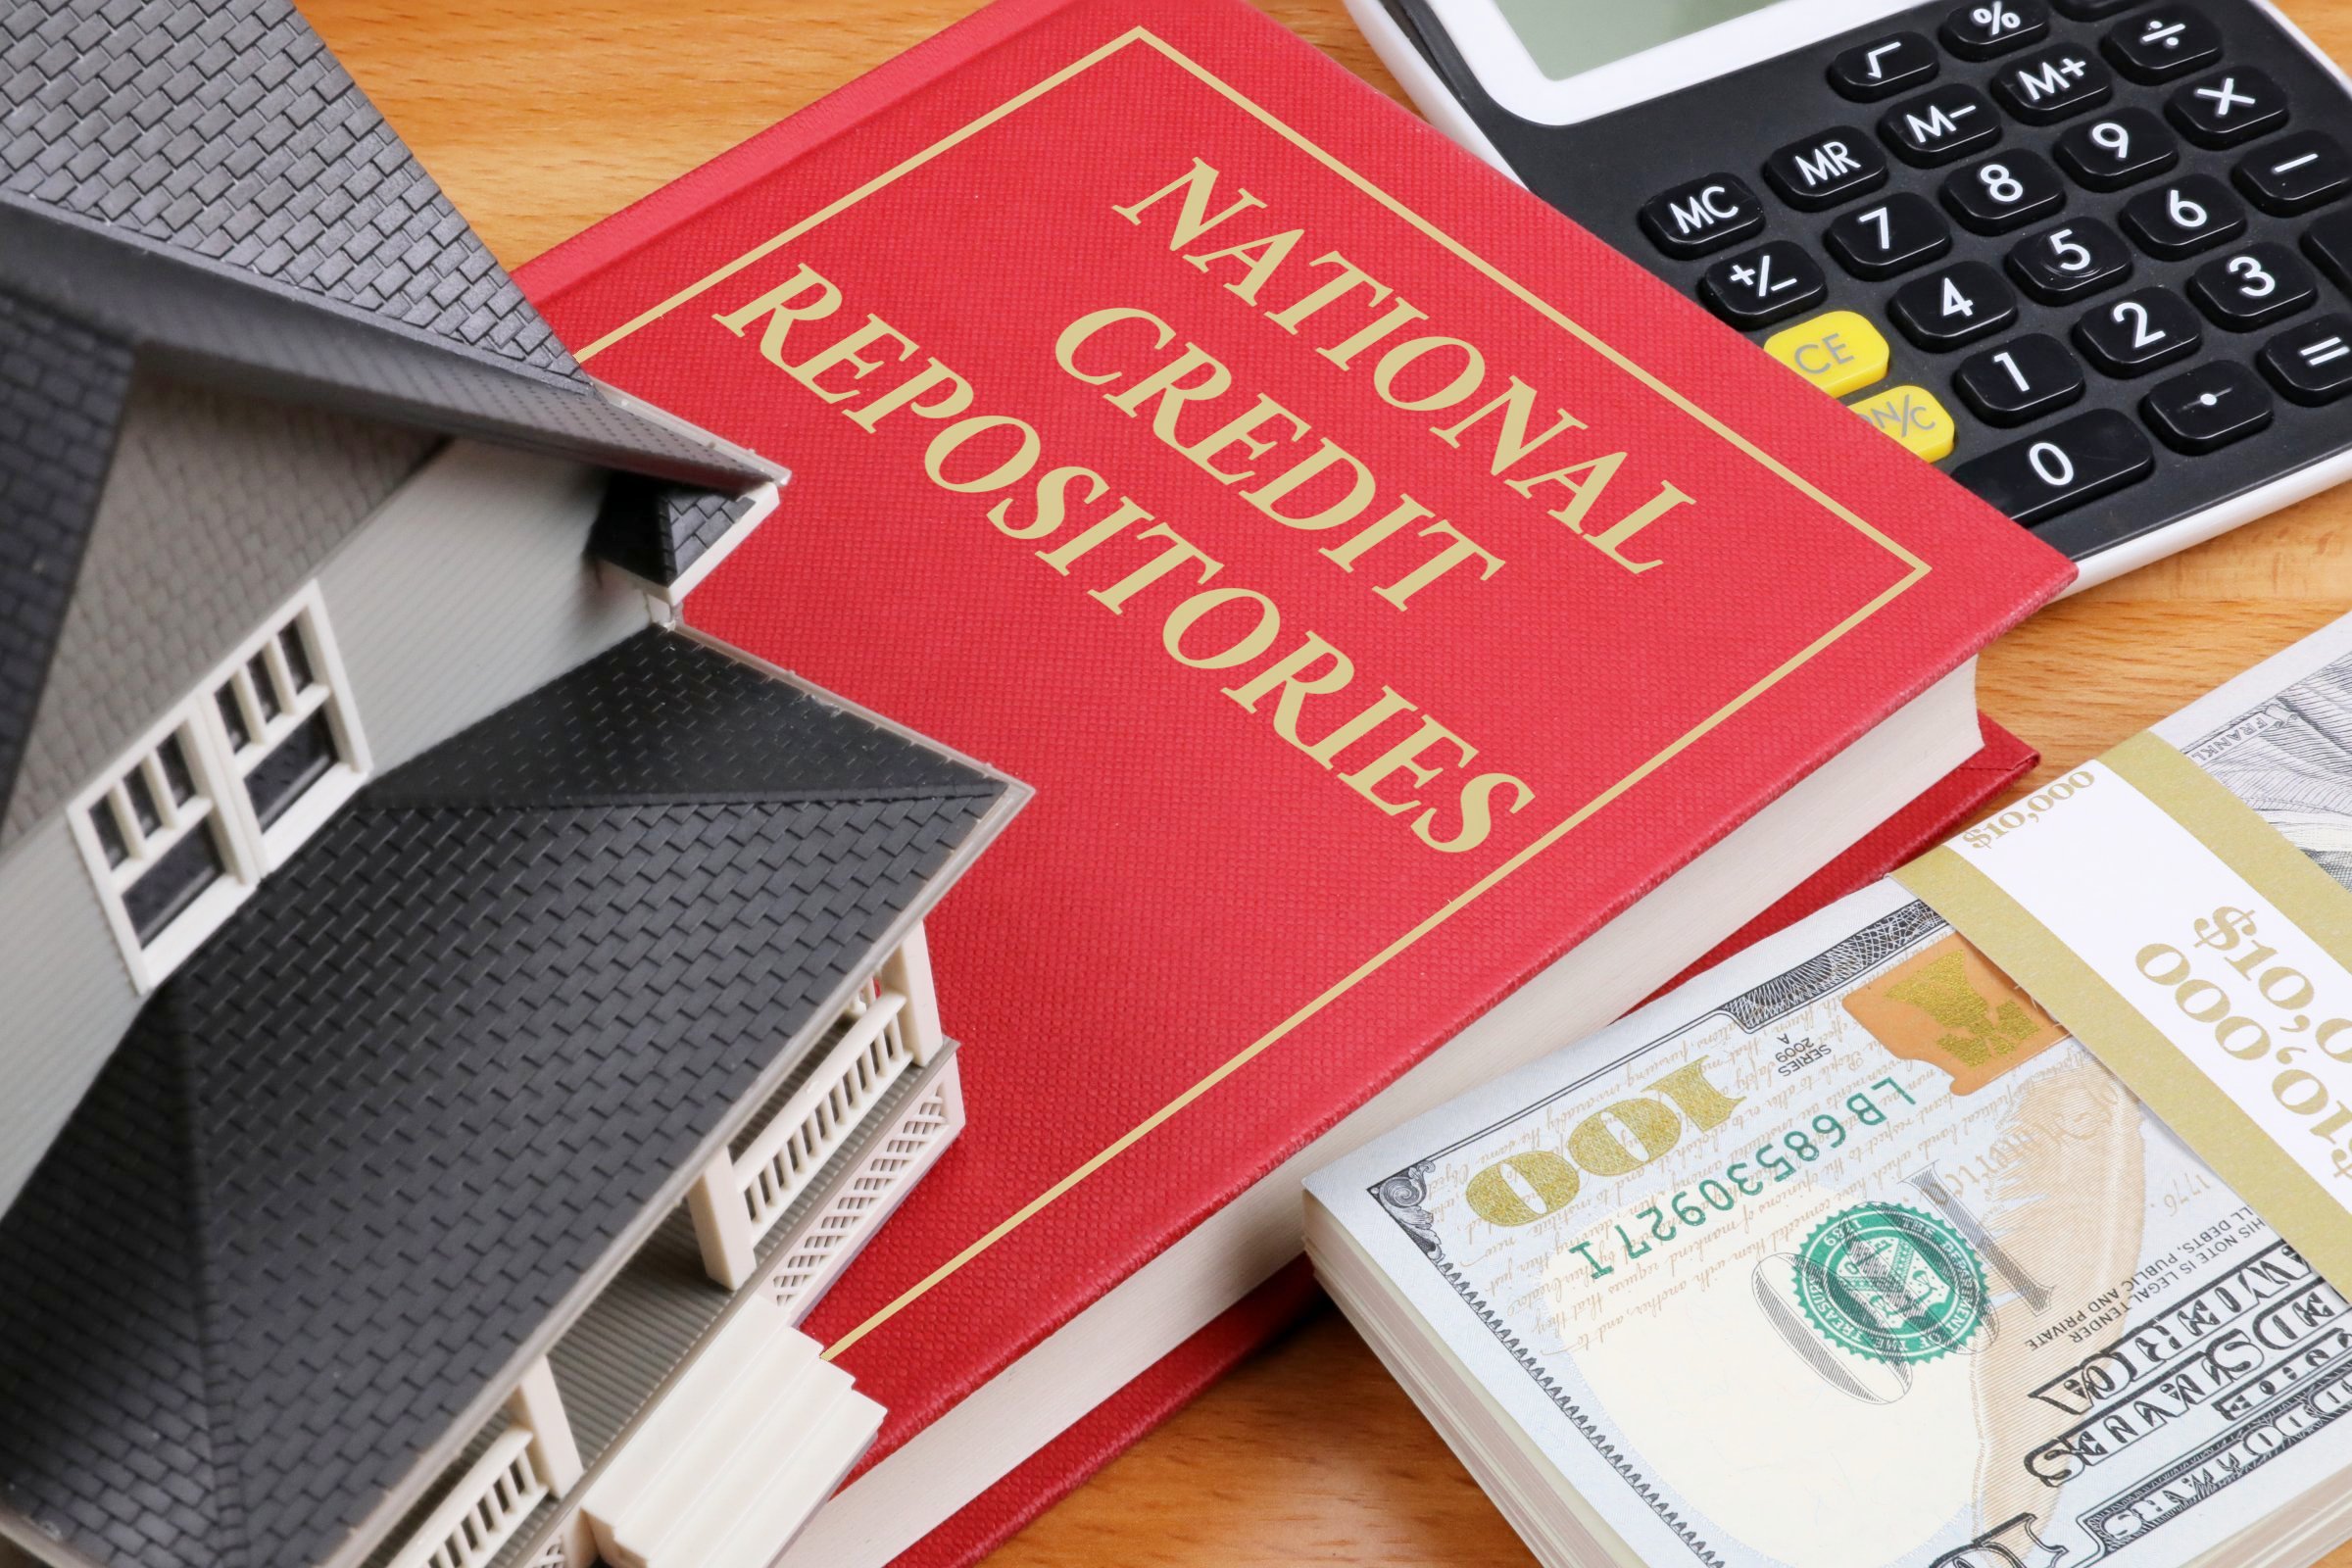 national credit repositories